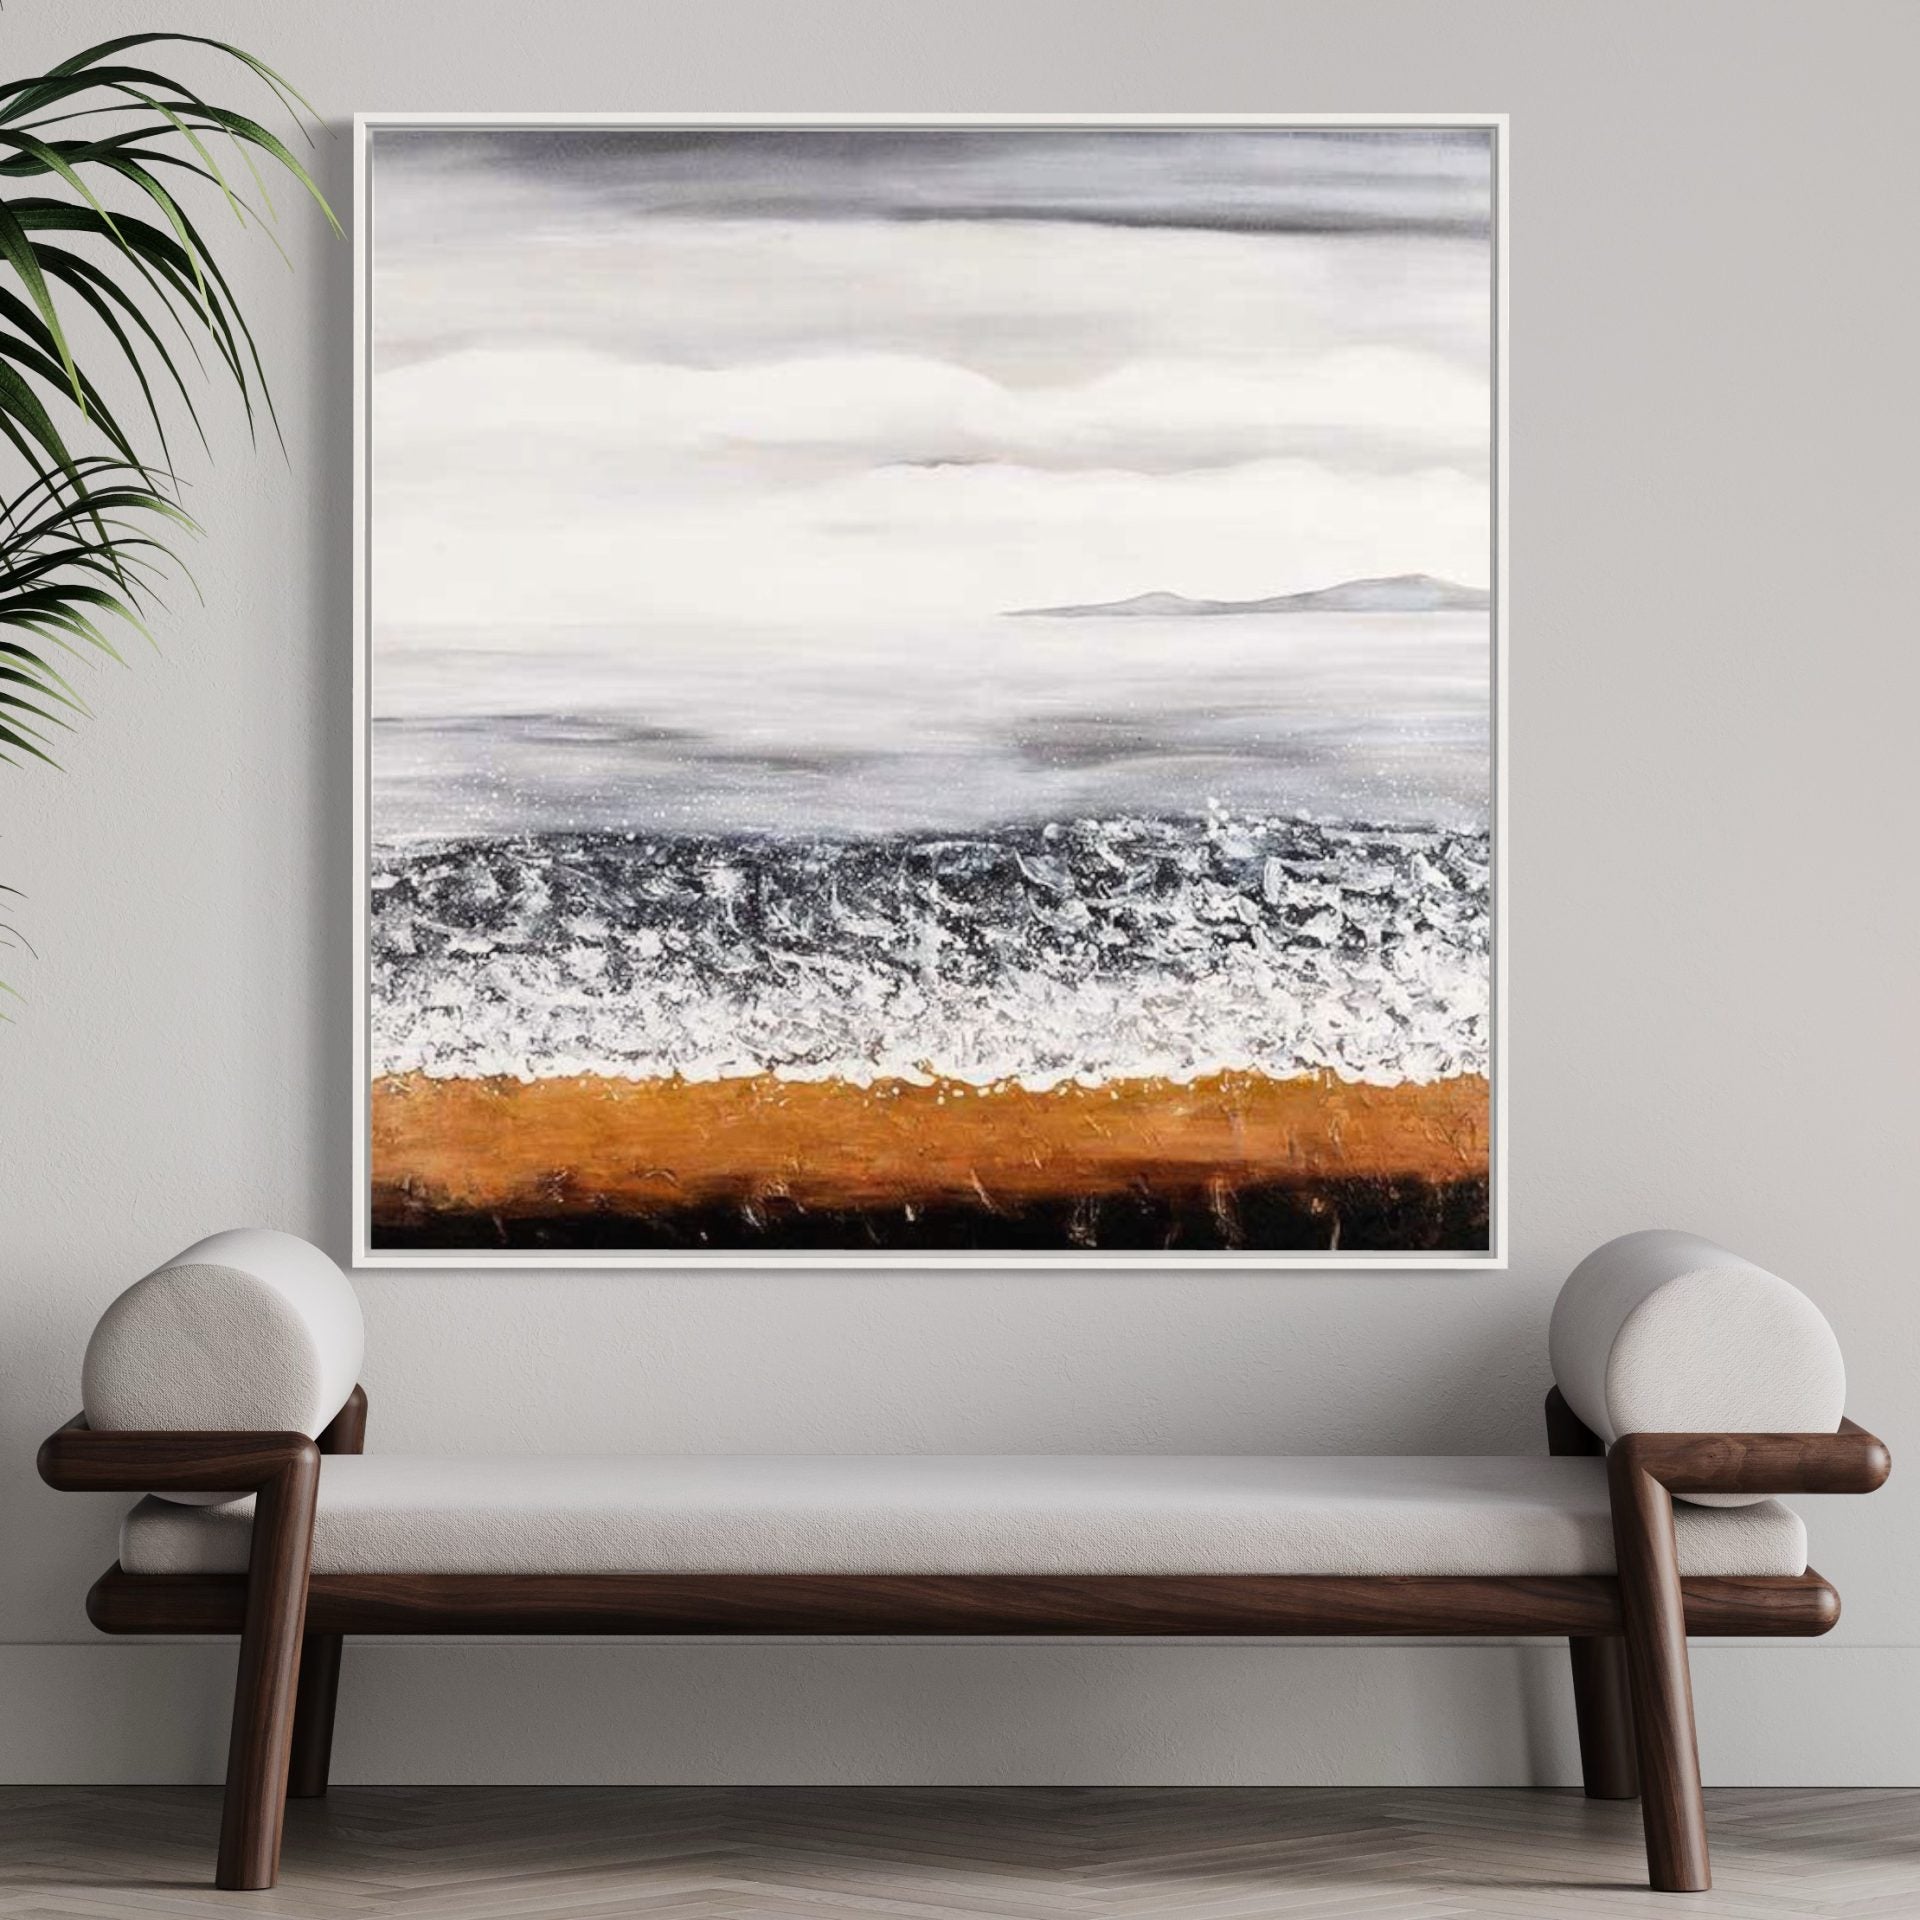 The Horizon, Black And Silver / 120x120cm